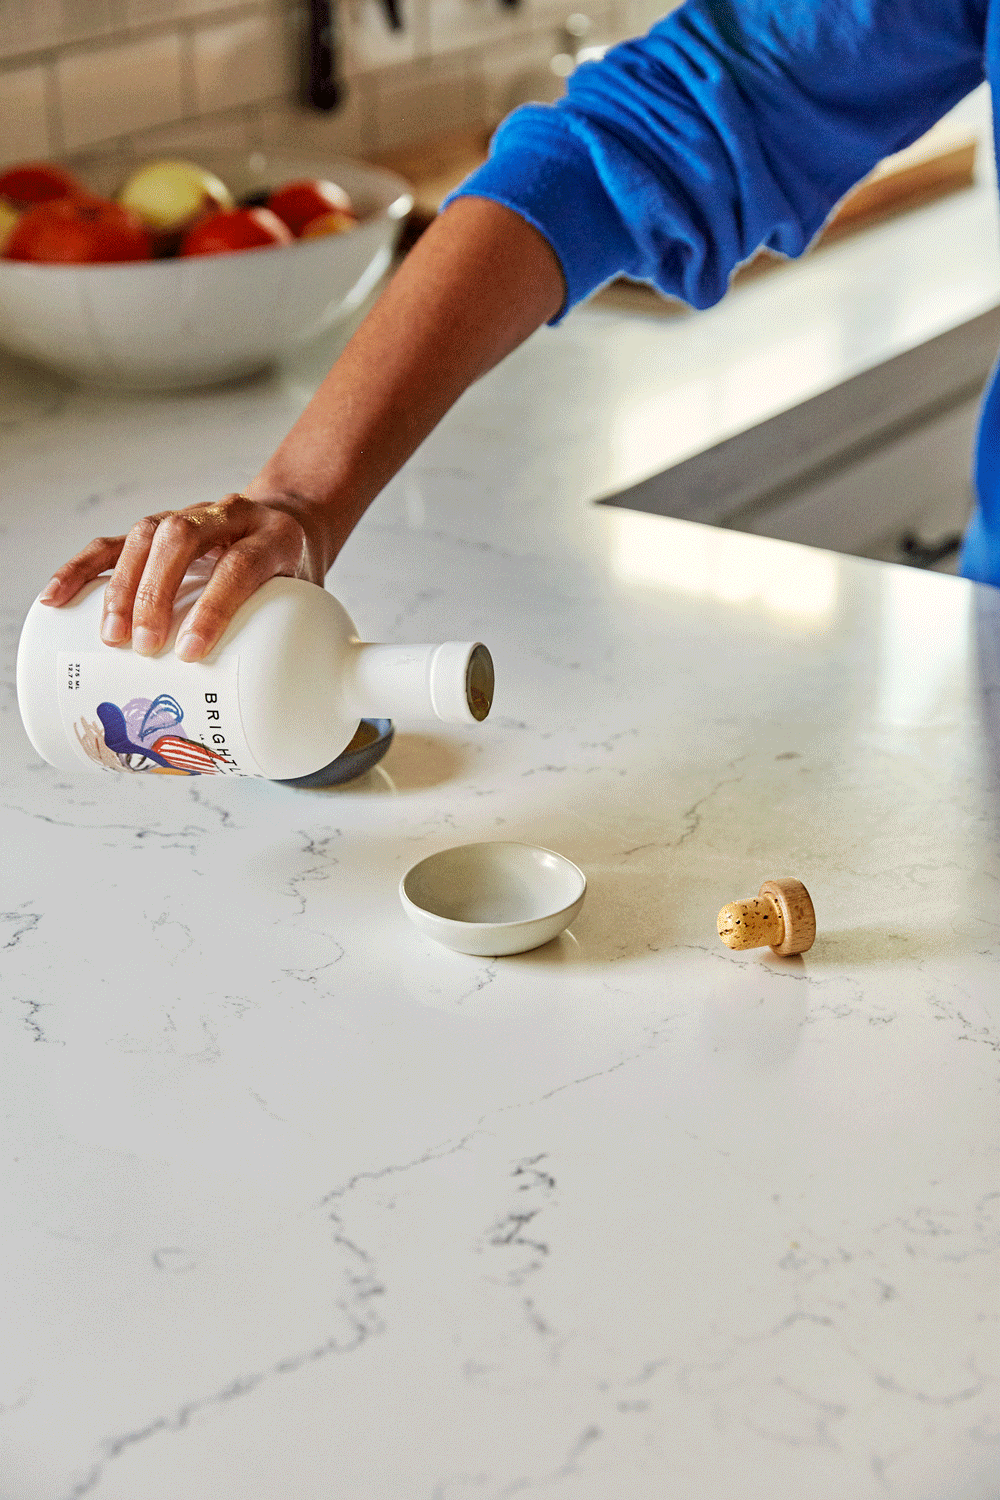 Hand pouring Brightland olive oil into small bowl